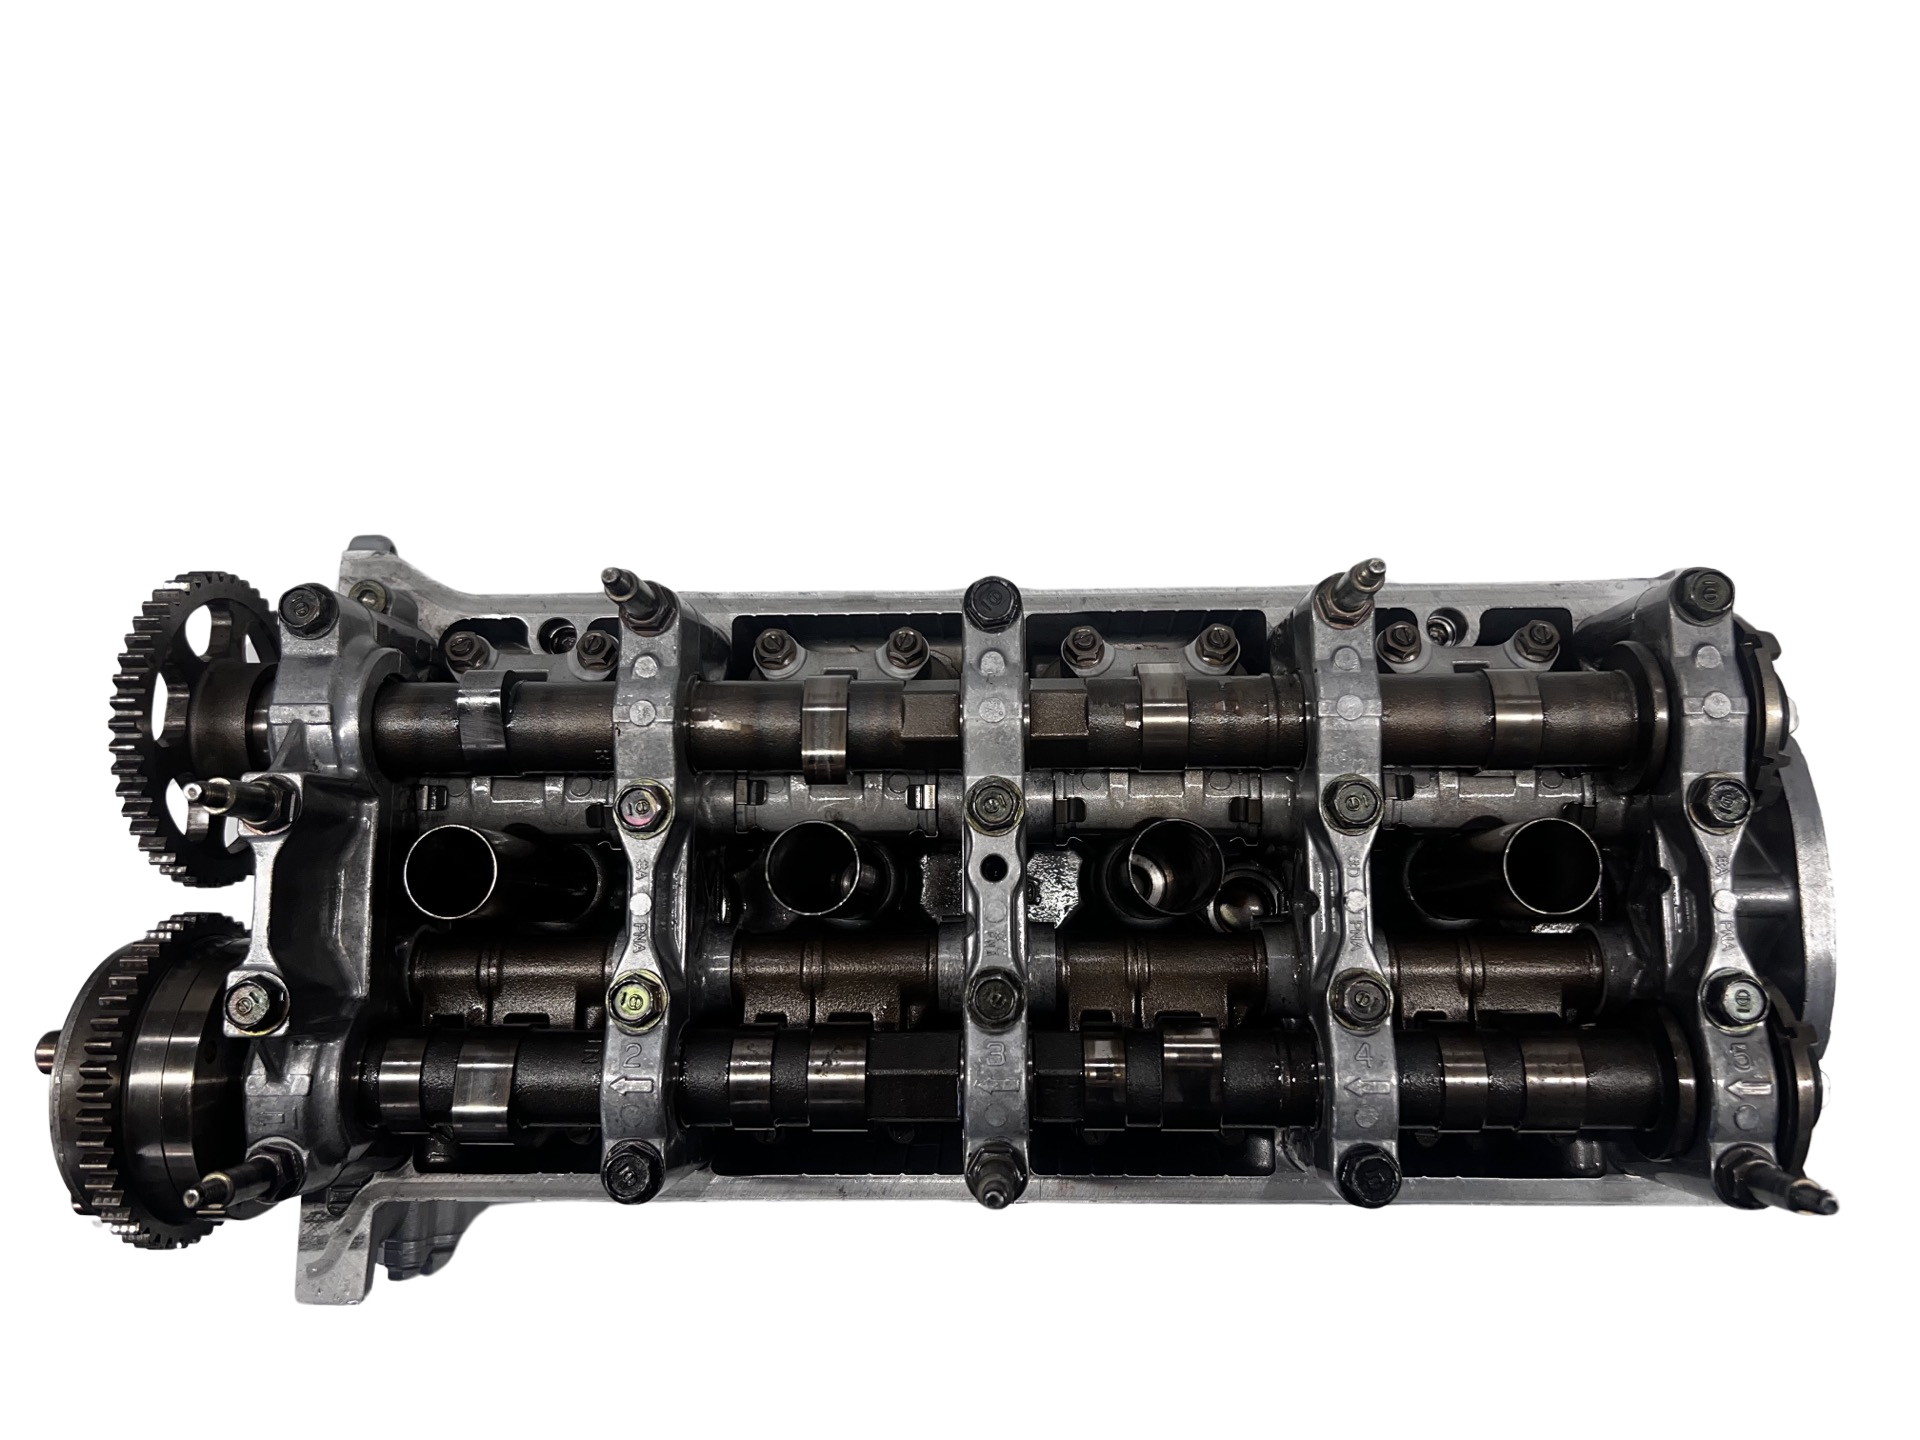 Top view of cylinder head for a Honda K24A RAA 2.4L